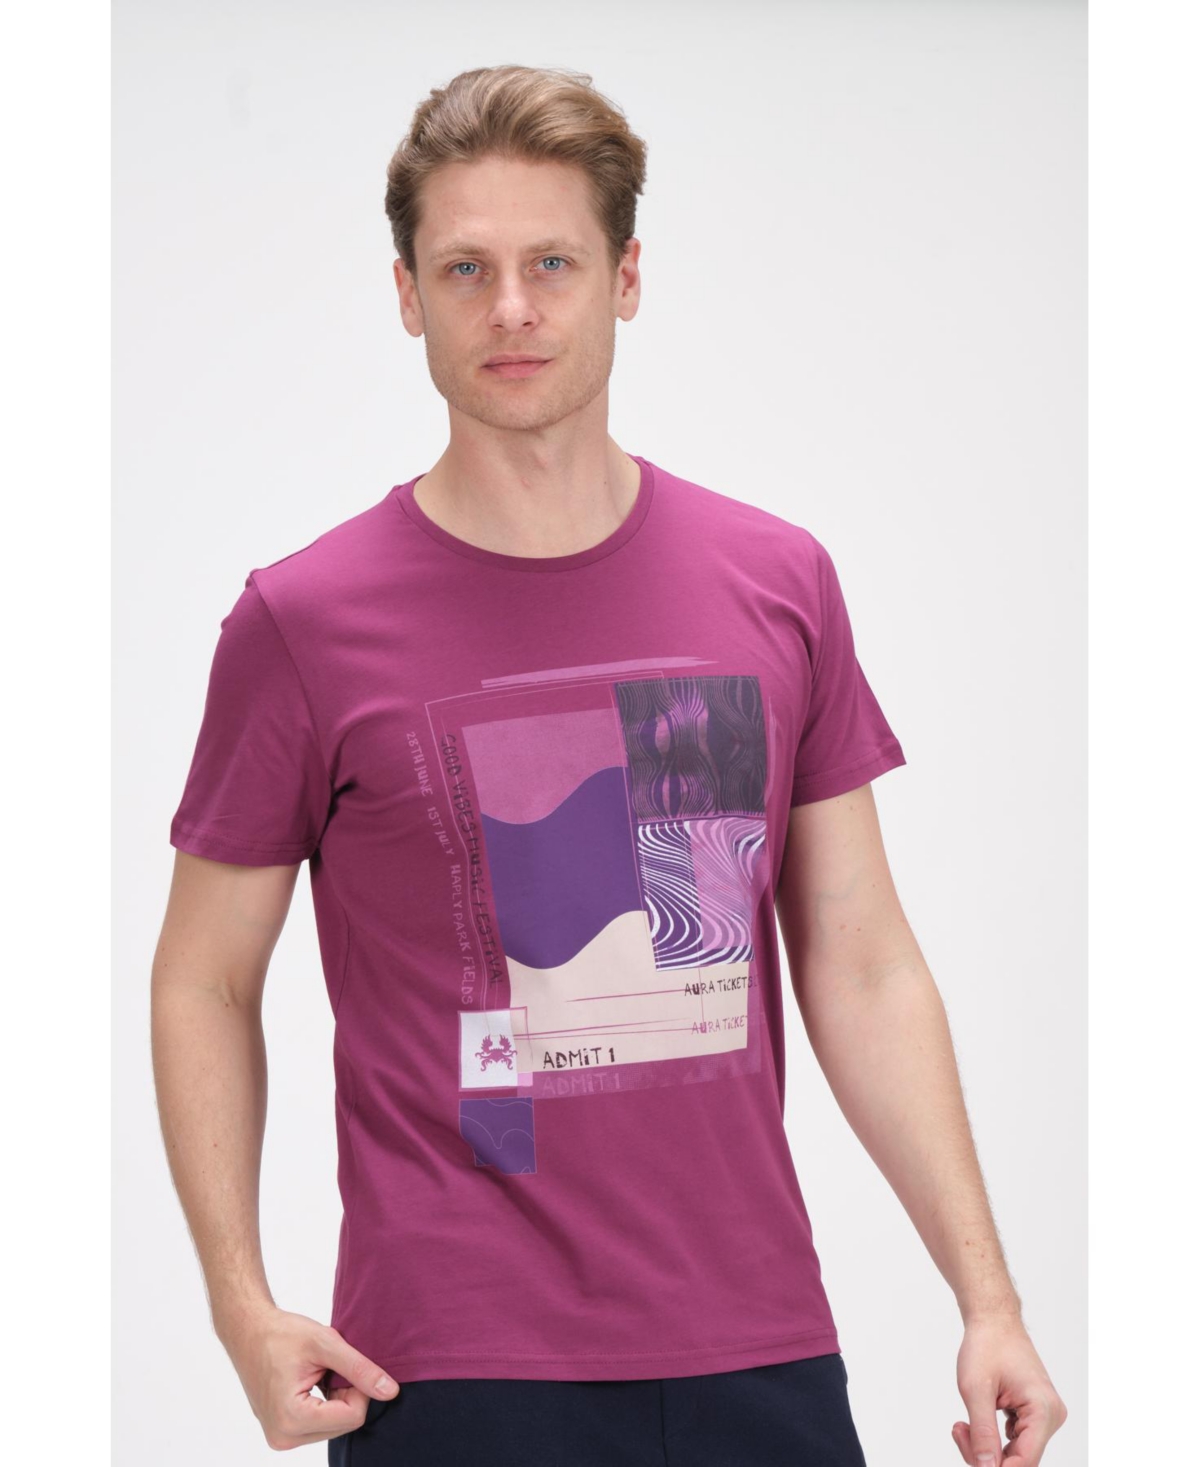 Men's Modern Print Fitted Admission T-shirt - Plum